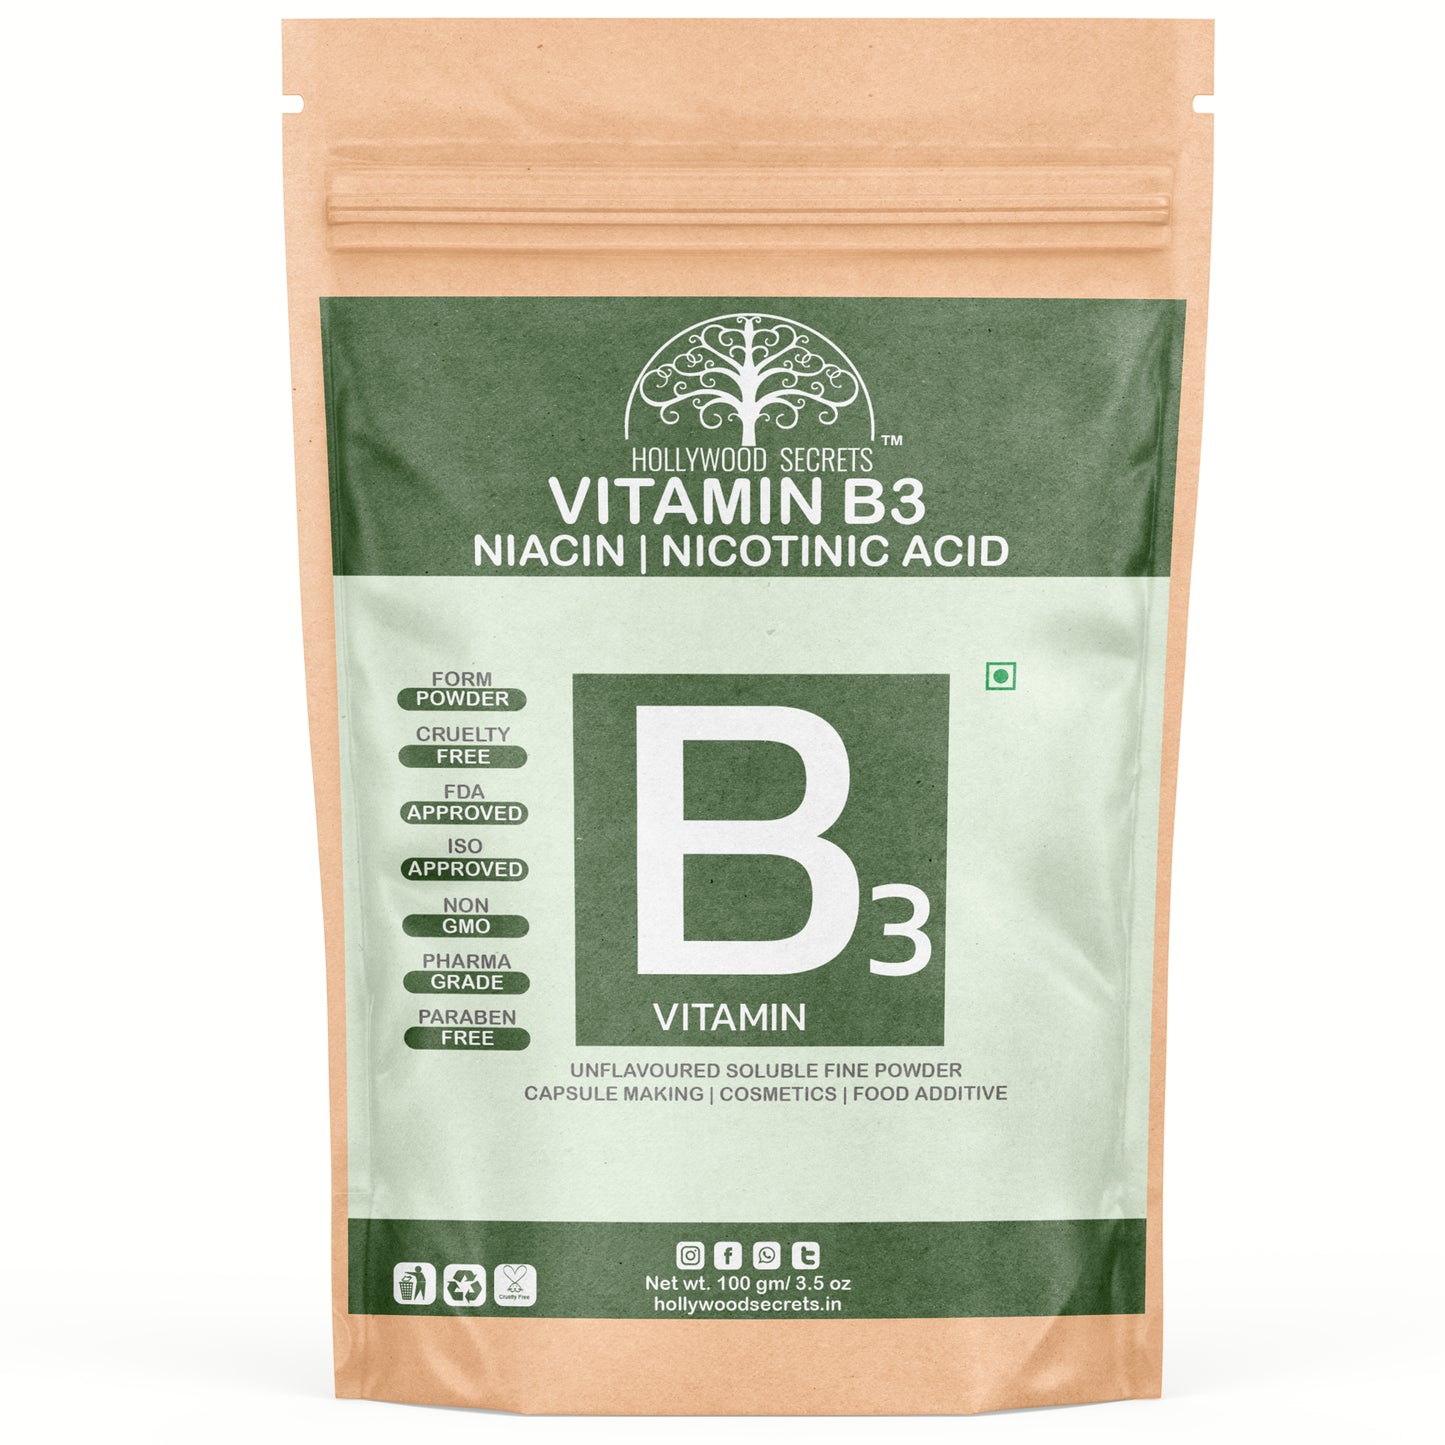 Hollywood Secrets  Pure  Best  Organic  Natural Buy now Shop sale Online Price bulk Manufacturer  Wholesaler  reviews ratings specifications Free Shipping Cash on delivery India supplement Powder  Vitamin B3 Niacin